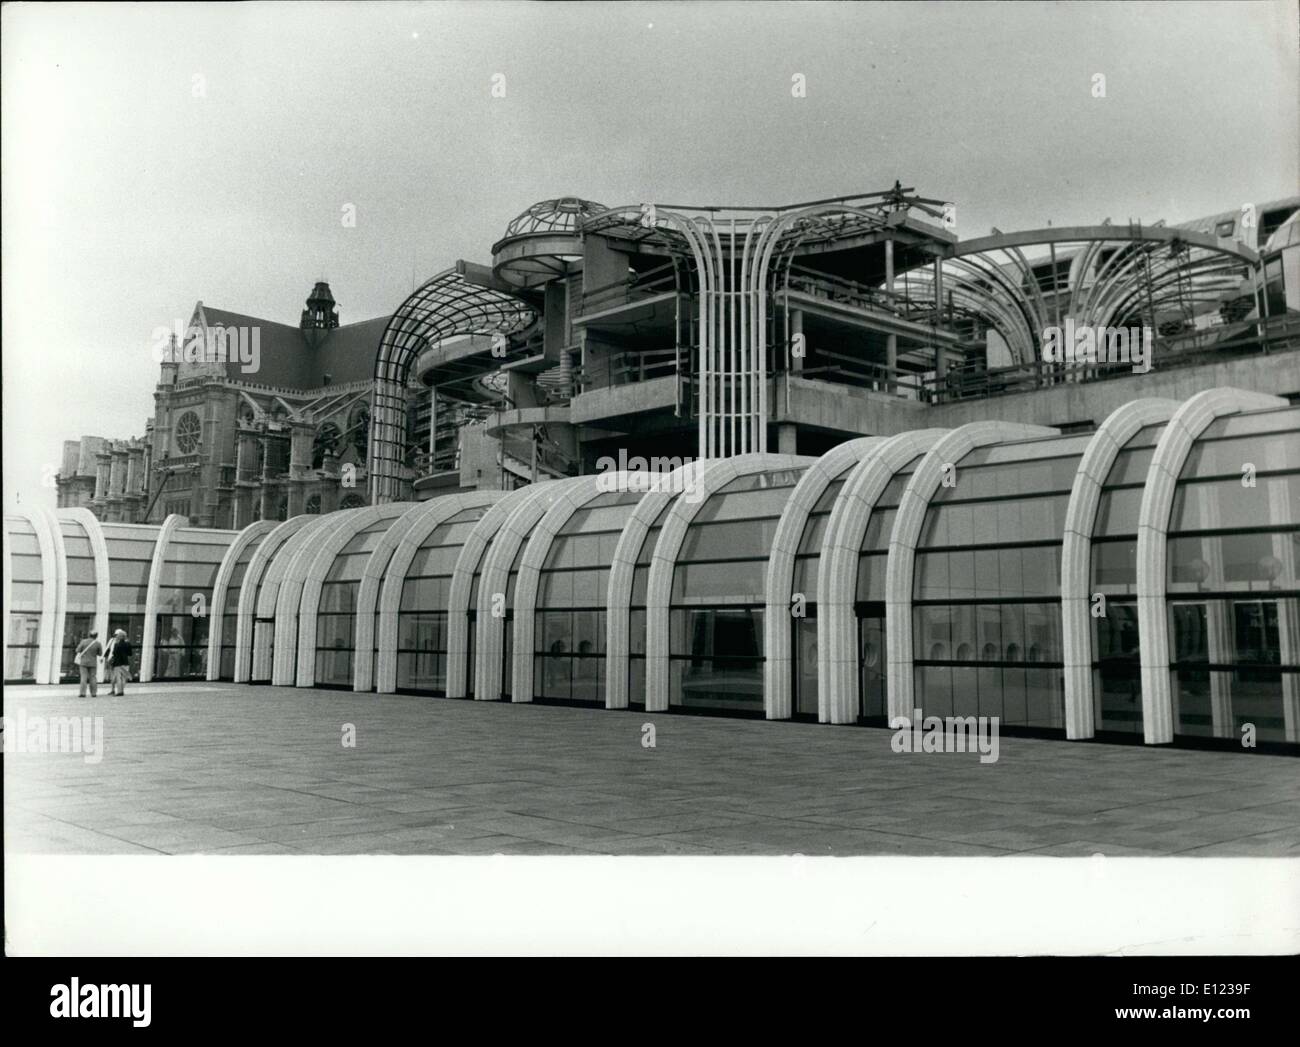 Aug. 18, 1982 - This huge set of buildings in the form of chanterelles, glass roofs, barrel vaults, and large glass and steel umbrellas will soon see the completion of its last building, Rue Lescot. The hole of Les Halles will be completely finished in 1984. Next to La Fontaine des Innocents, behind the scaffolding, about a hundred housing accommodations, a hotel, and offices are being built. The new Lescot building will be able to hold public and cultural facilities. View of the Les Halles forum interior, behind the housing accommodations in construction. Stock Photo